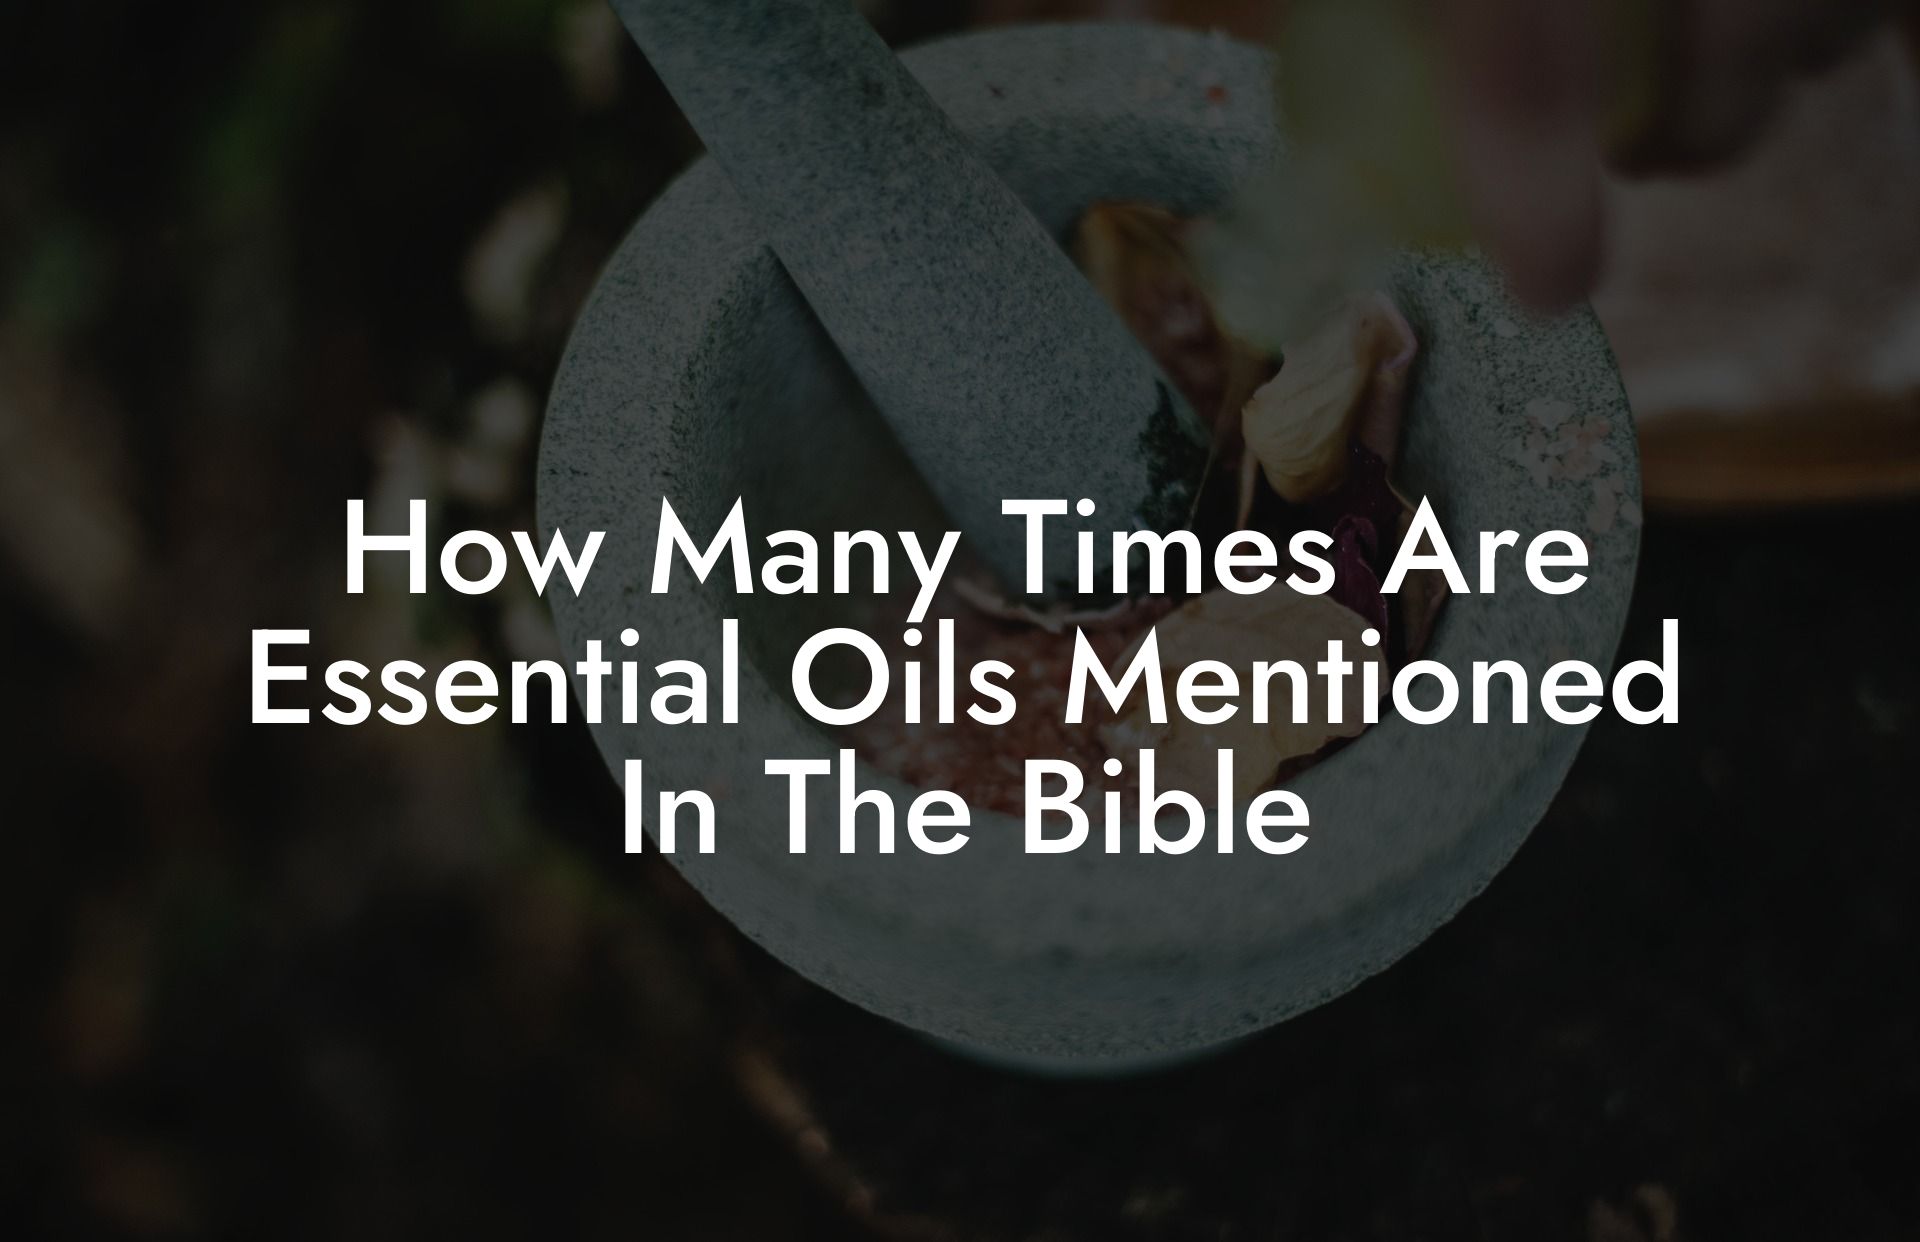 How Many Times Are Essential Oils Mentioned In The Bible